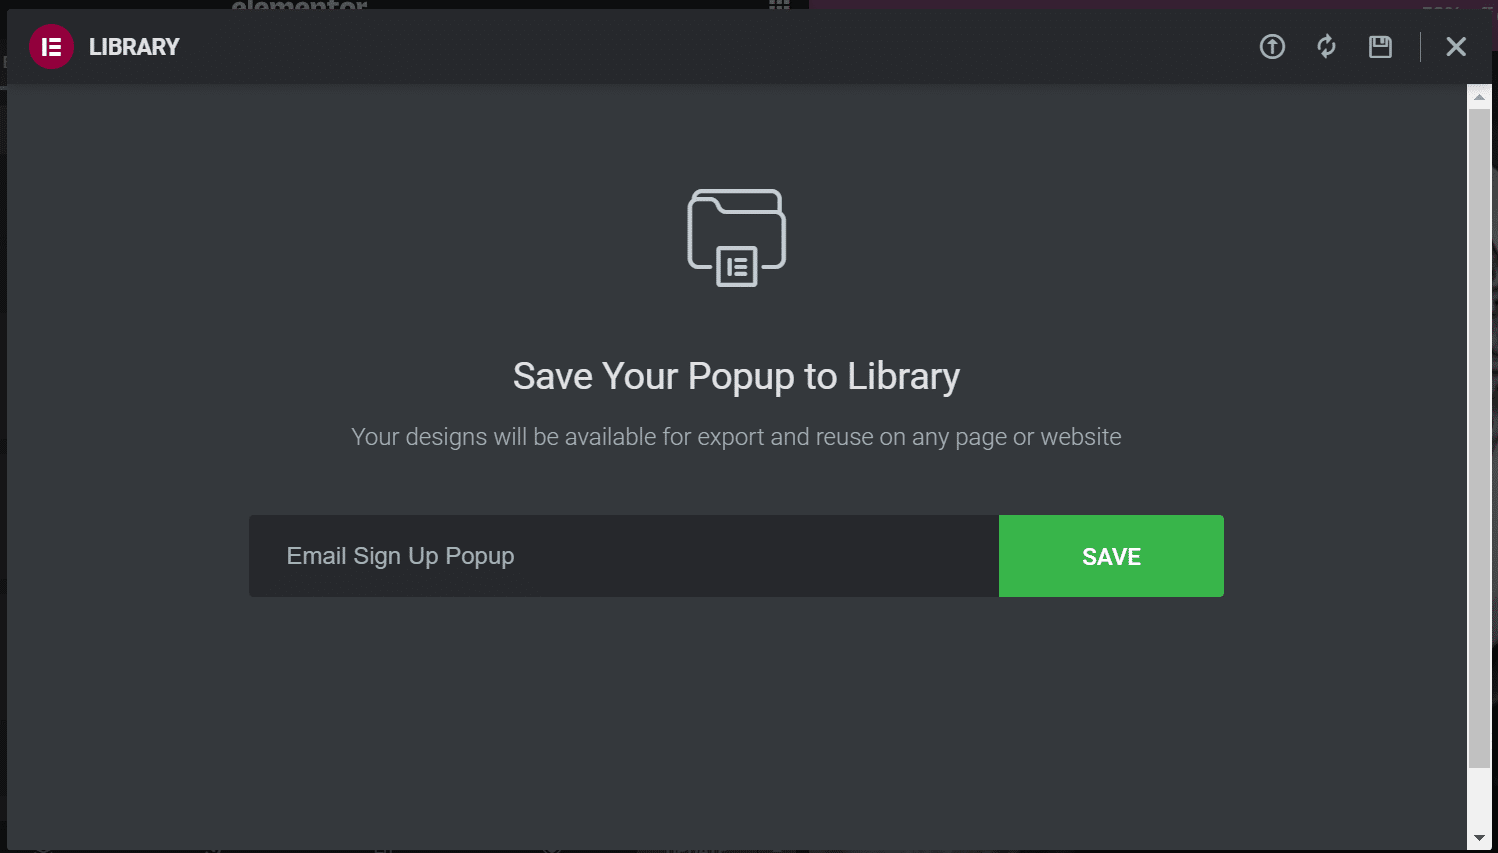 Give the popup template a name and then save it